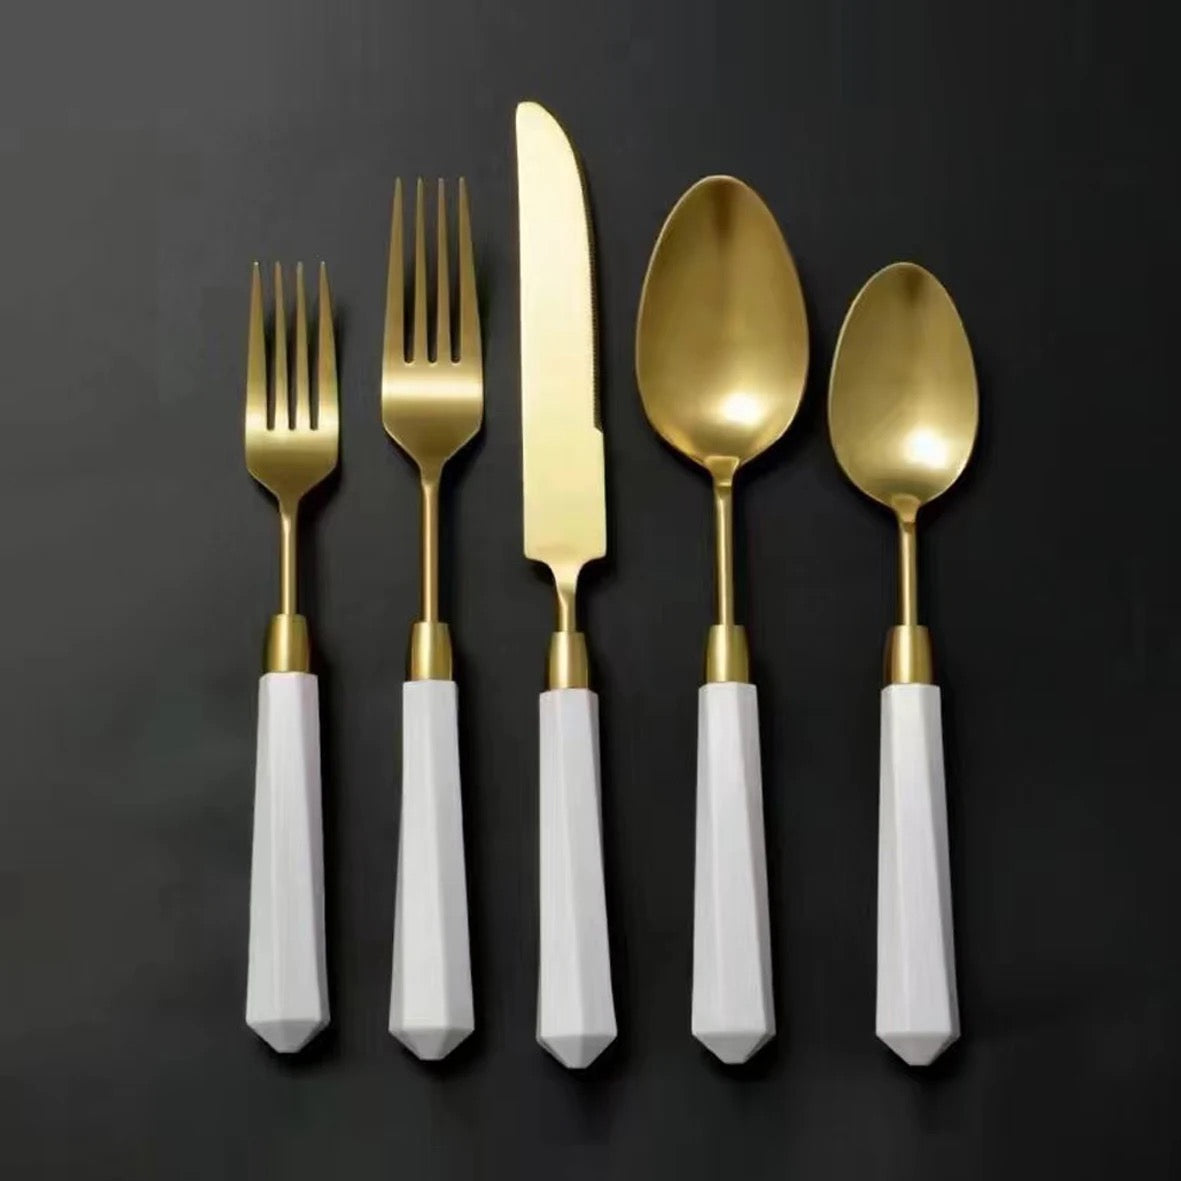 GOLD Flatware Set With WHITE Handles